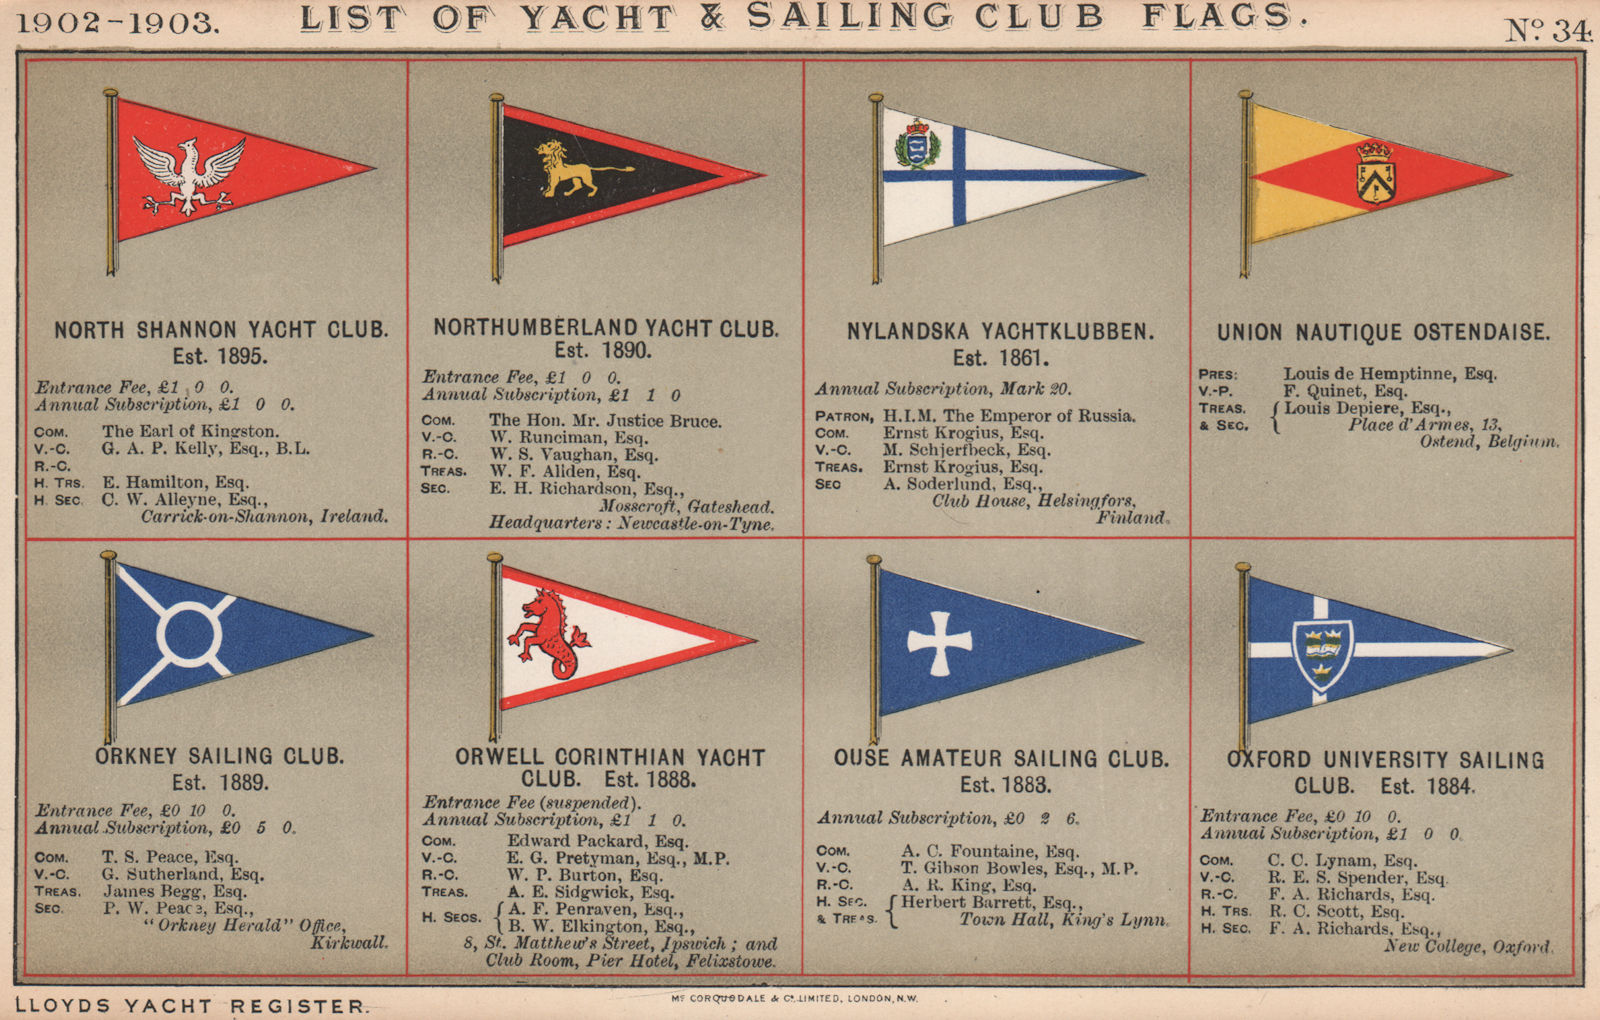 Associate Product YACHT & SAILING CLUB FLAGS N-O. North Shannon -Orkney - Oxford University   1902